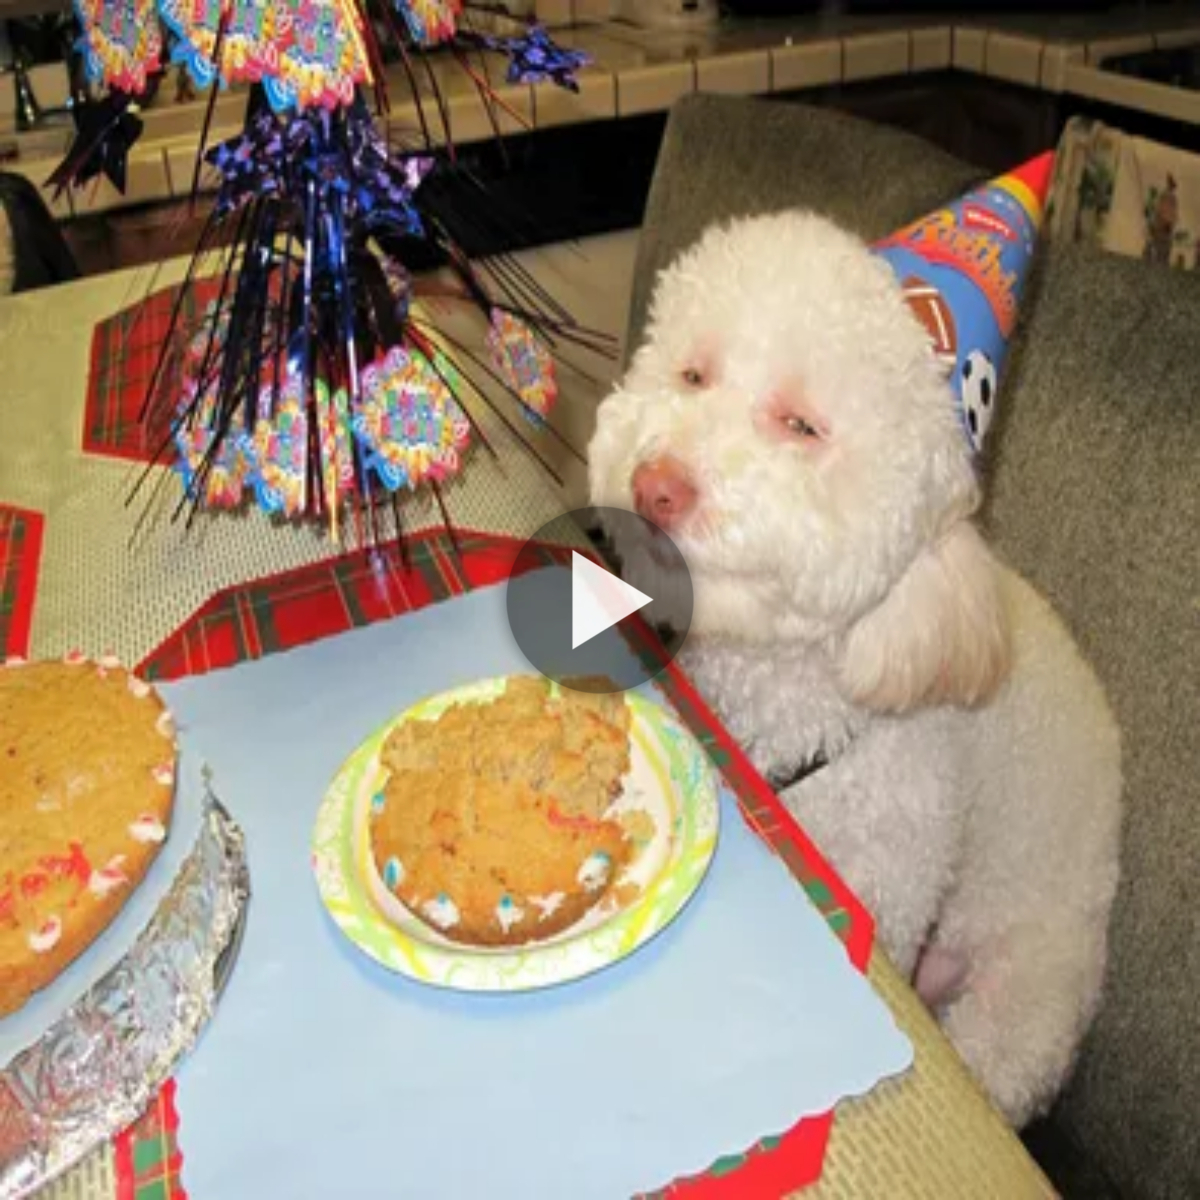 The dog smiled happily as everyone wished him a happy birthday and joined the party.